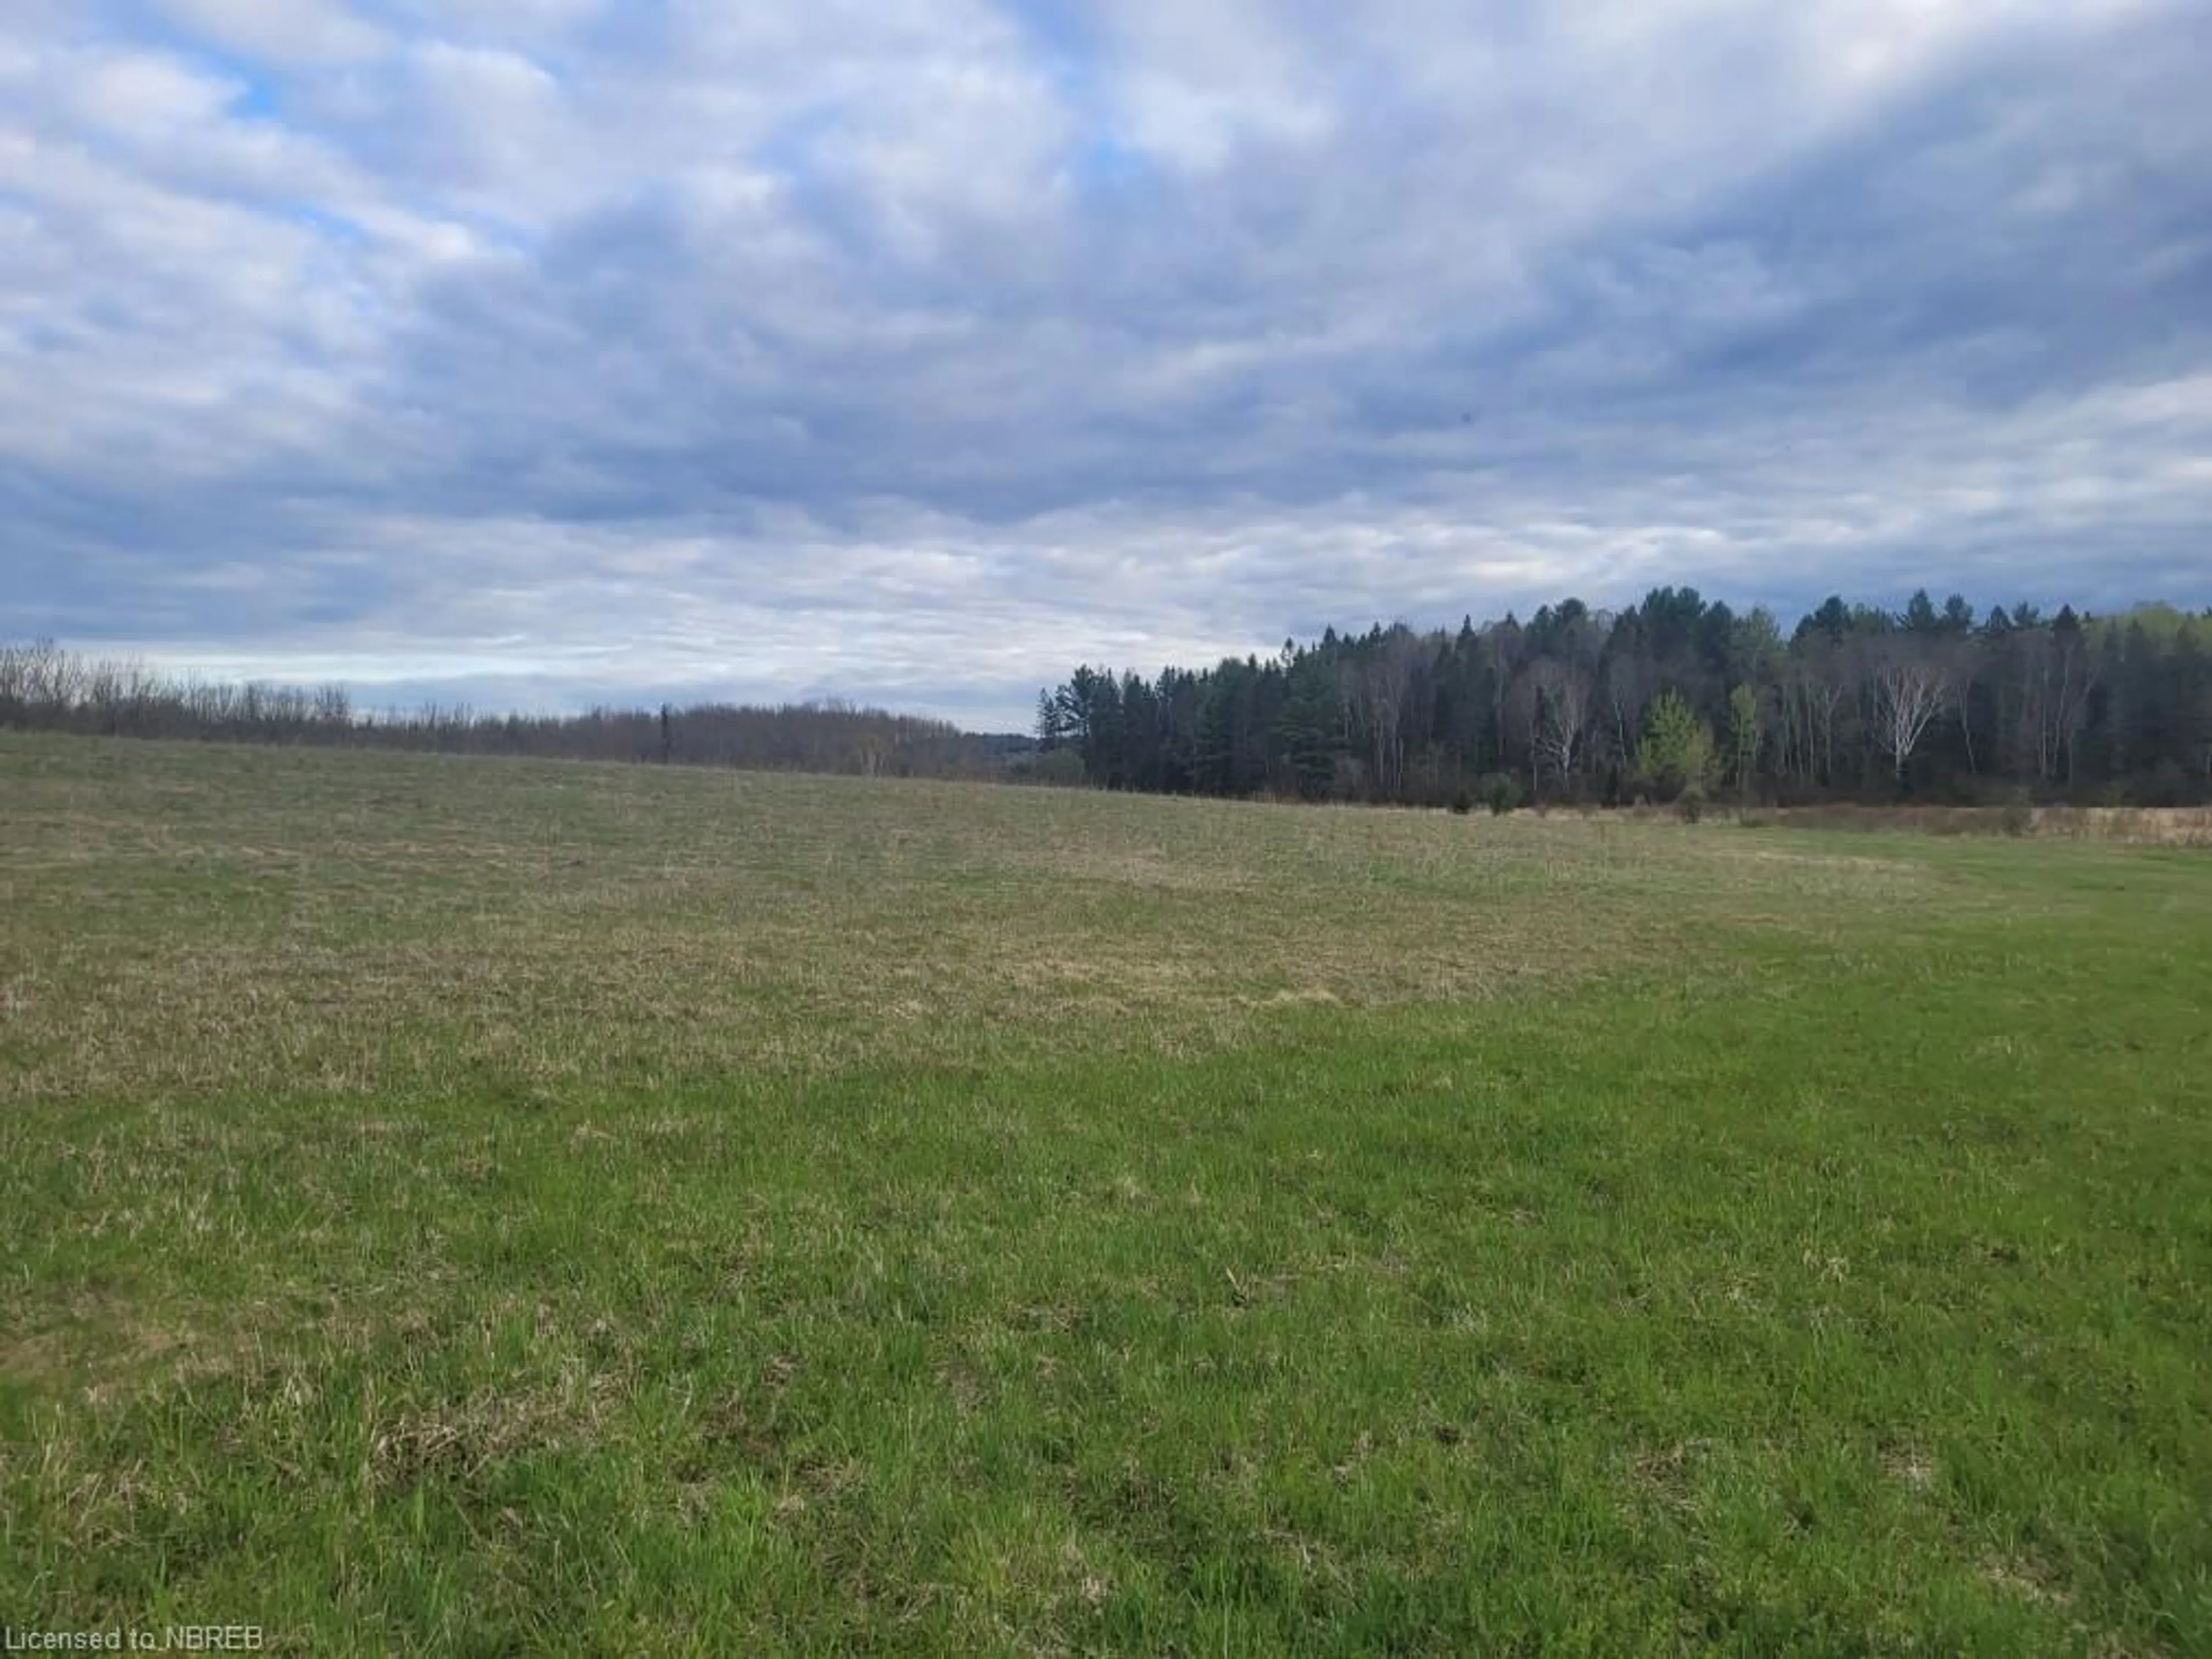 Forest view for LOT 29 CON 2 Adams Rd, Mattawa Ontario P0H 1V0